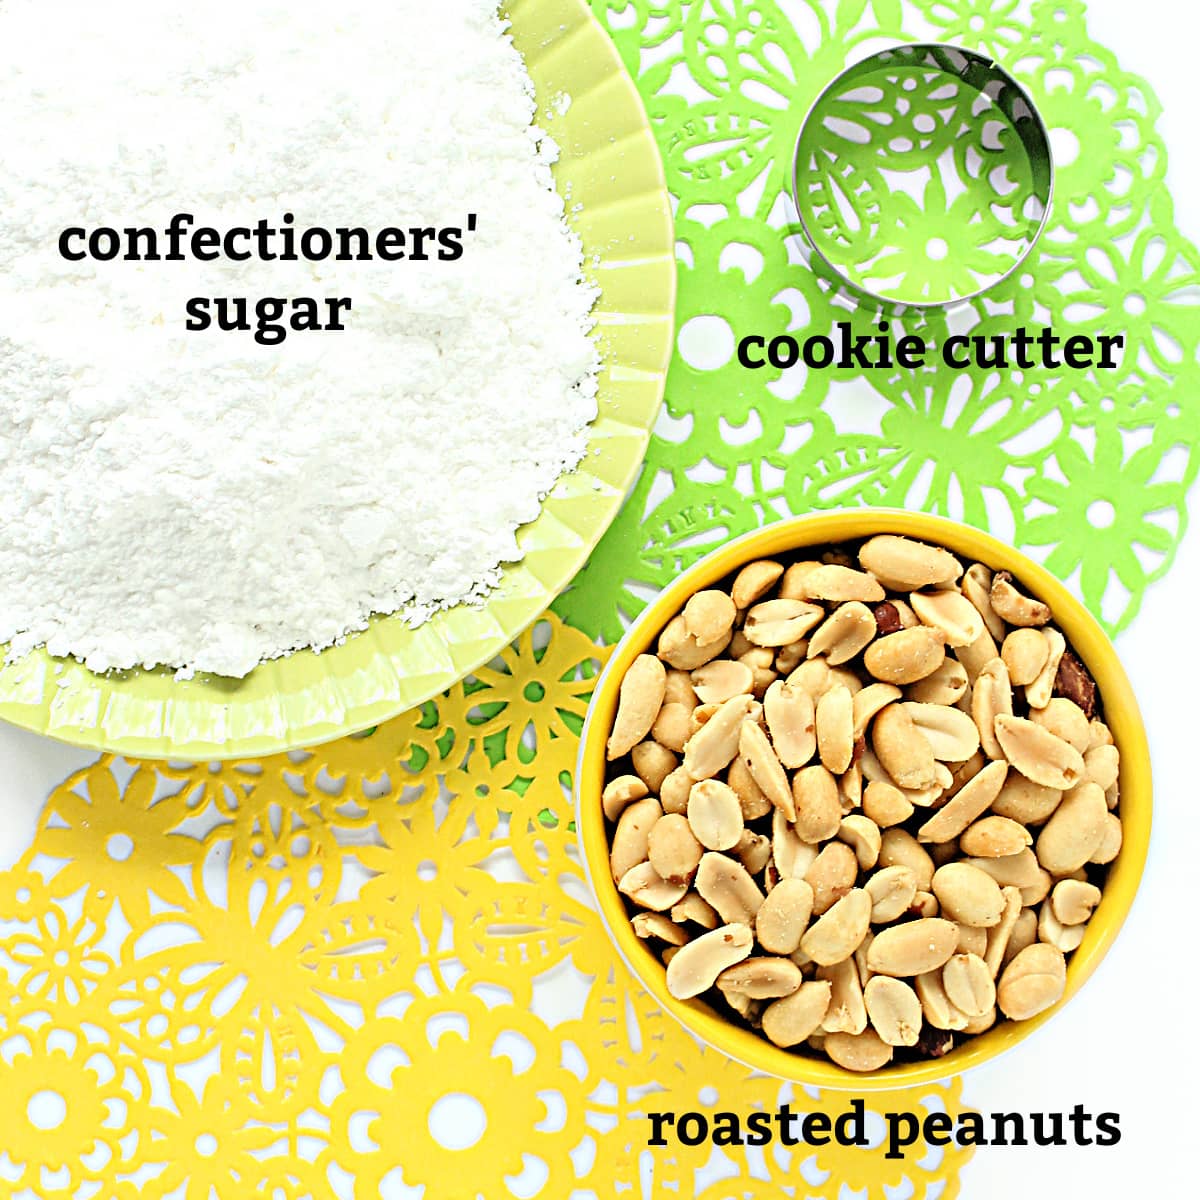 Ingredients: confectioners' sugar, roasted peanuts.